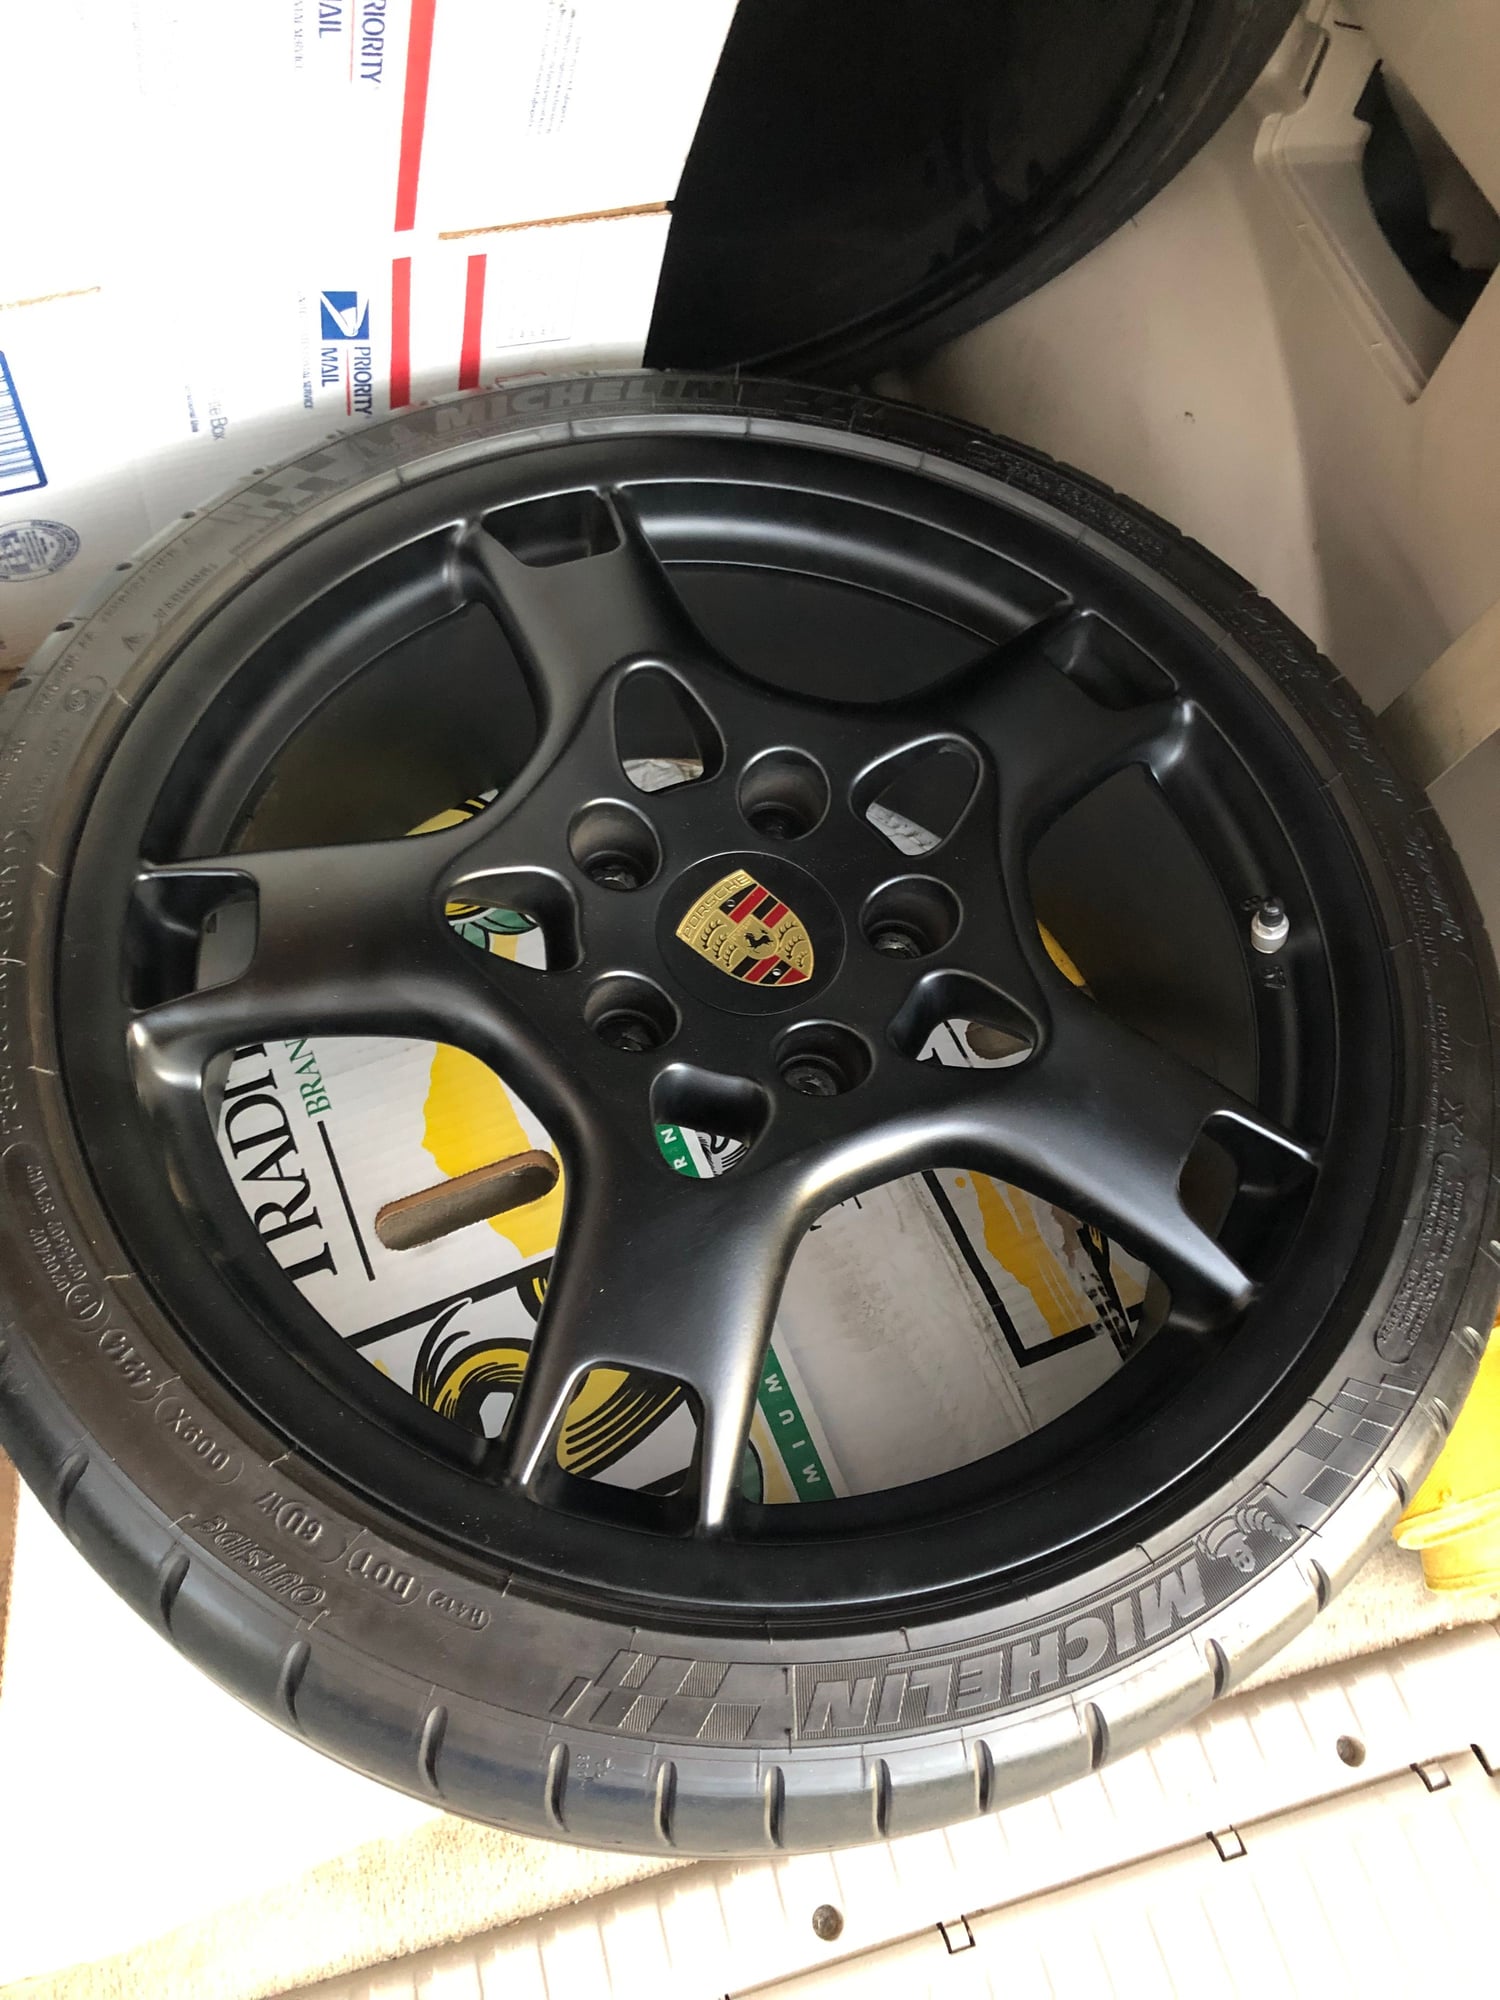 Wheels and Tires/Axles - Set of 19" satin black oem lobster fork rims with Michelins and tpms - Used - 2005 to 2009 Porsche 911 - Monterey Park, CA 91755, United States